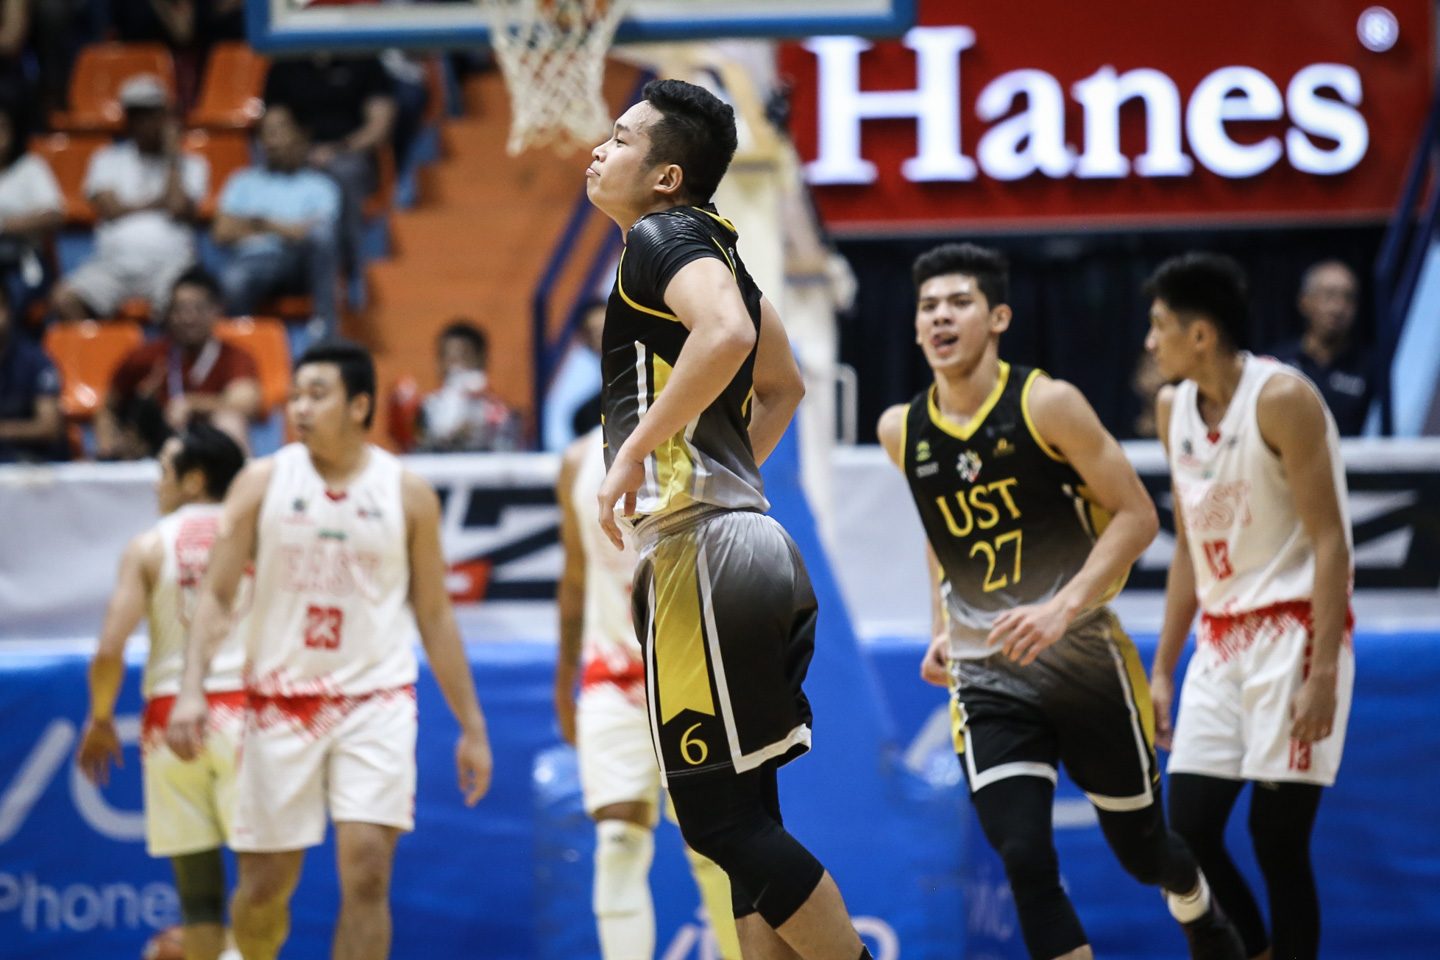 Lee fires 8 threes, rookie Cansino drops triple-double in UST win